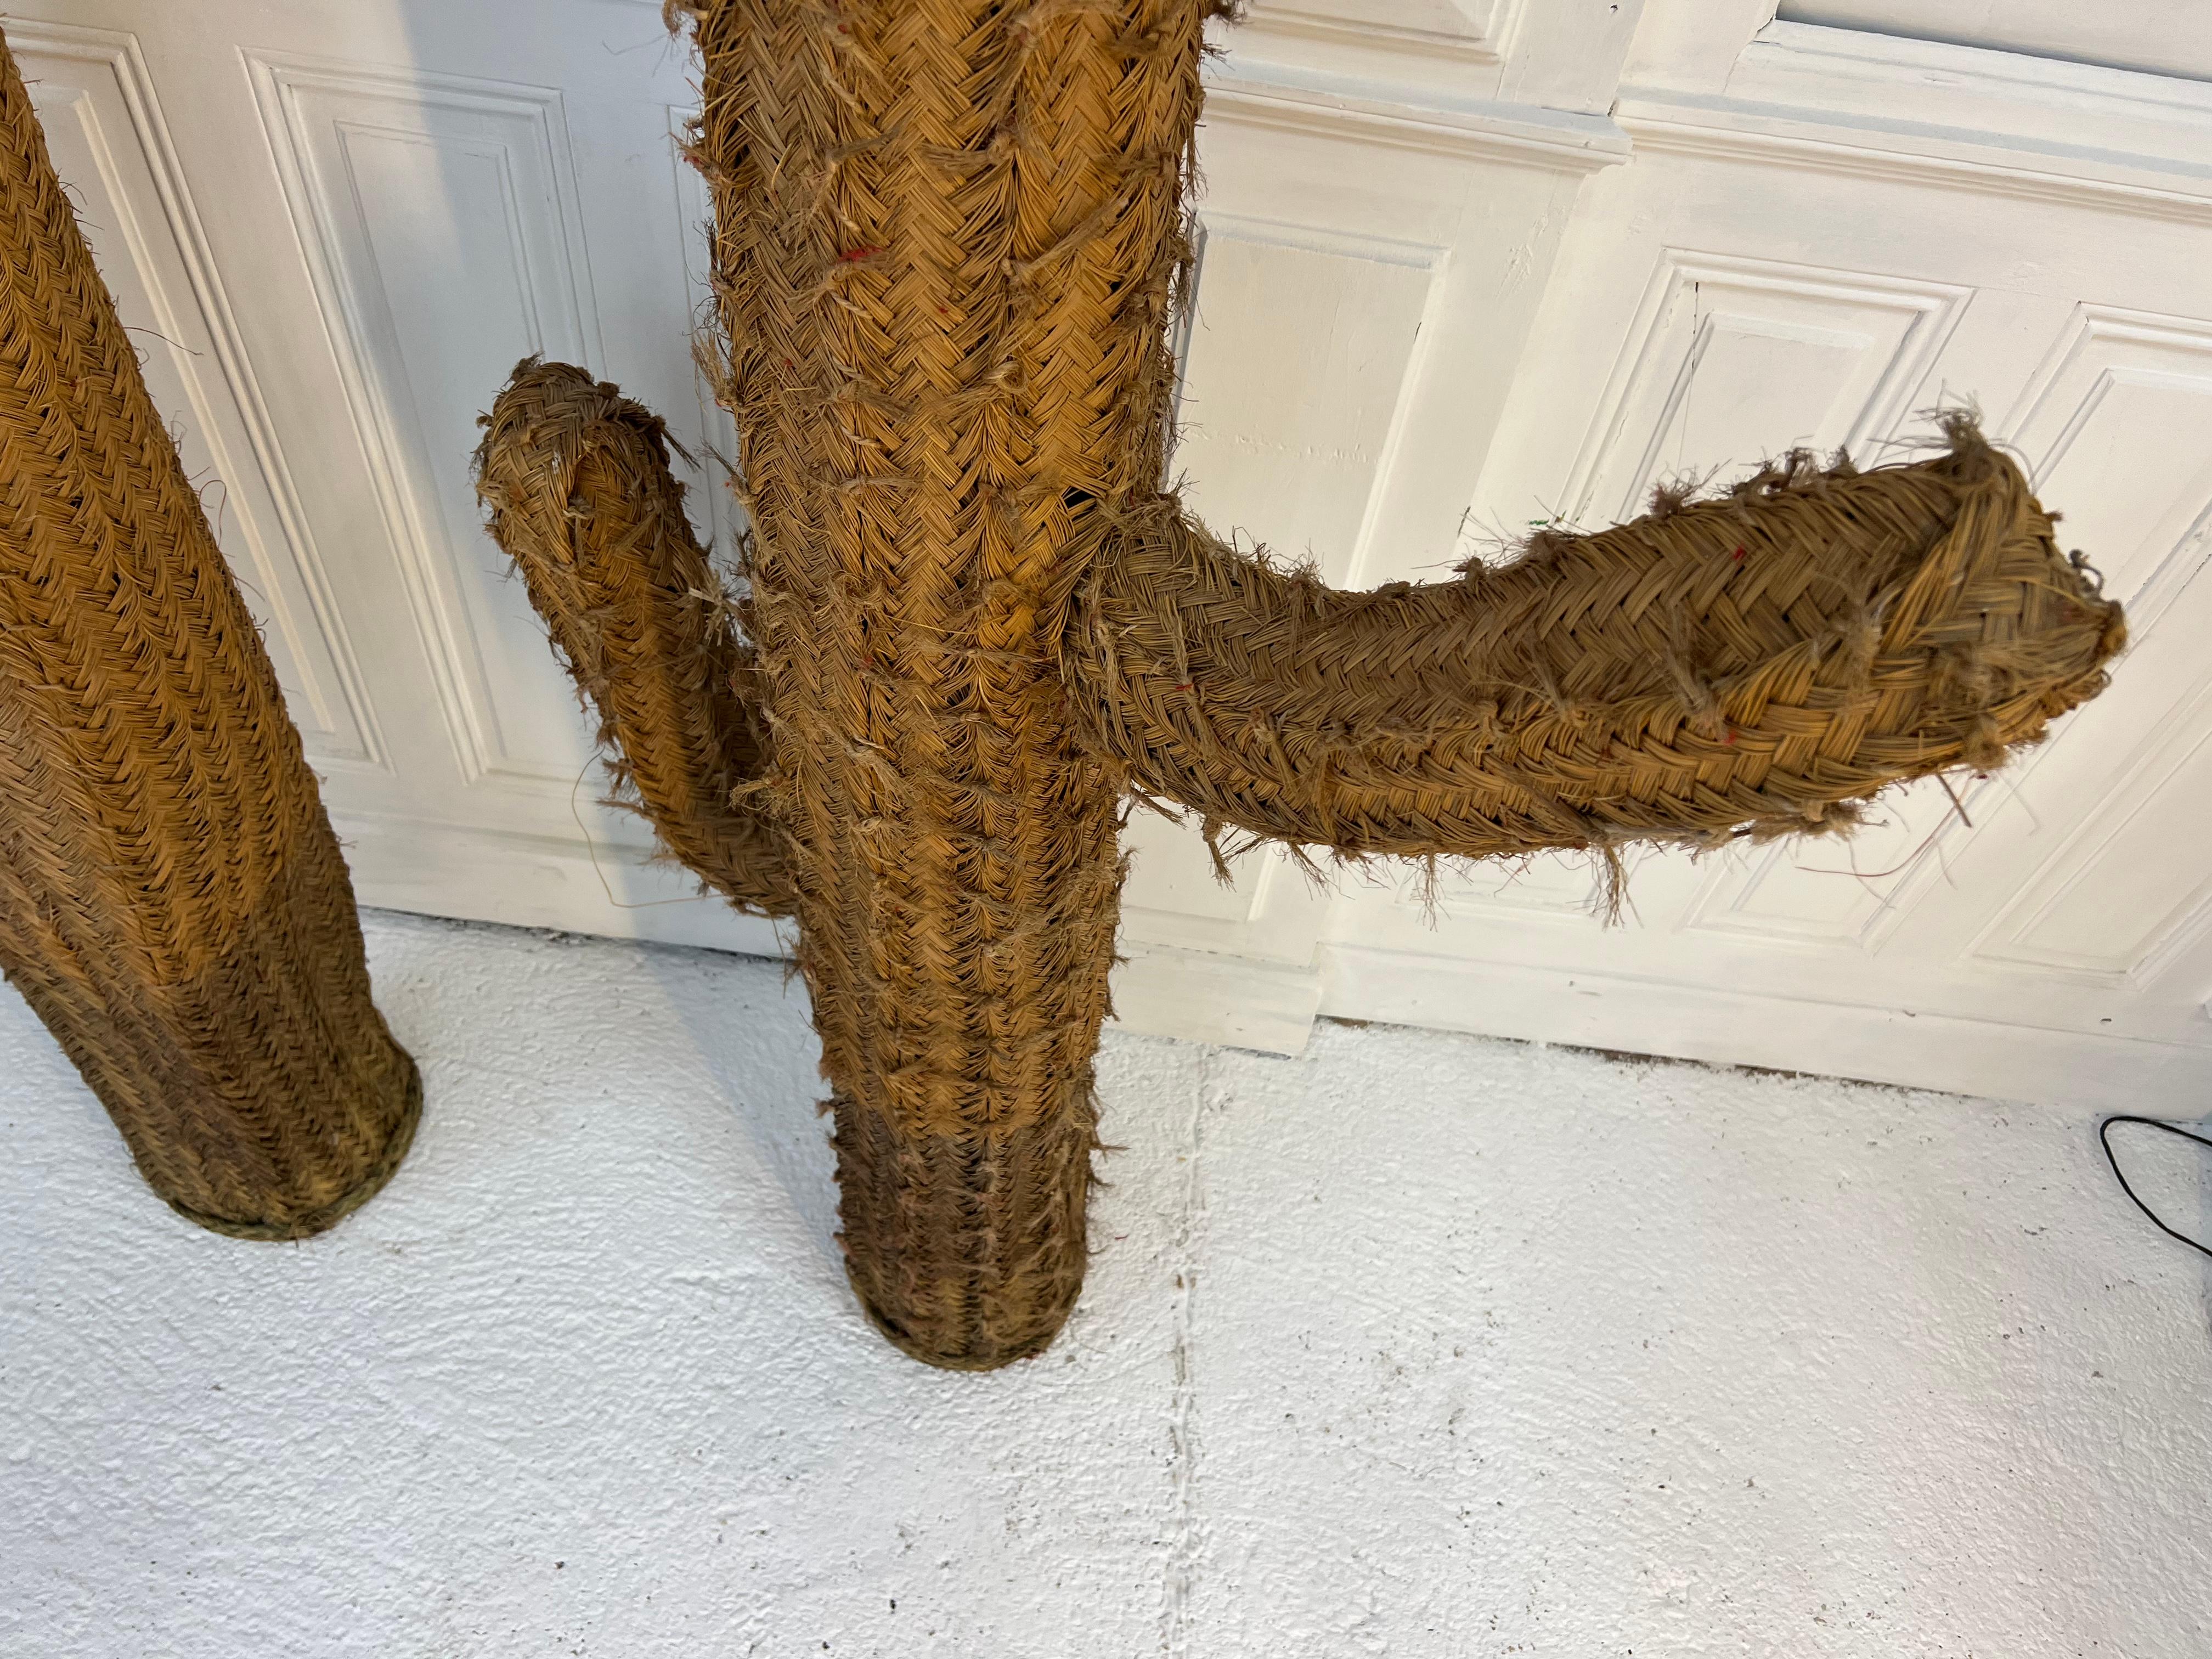 French Large Wicker Cactus, 1970s Garden’s Decoration For Sale